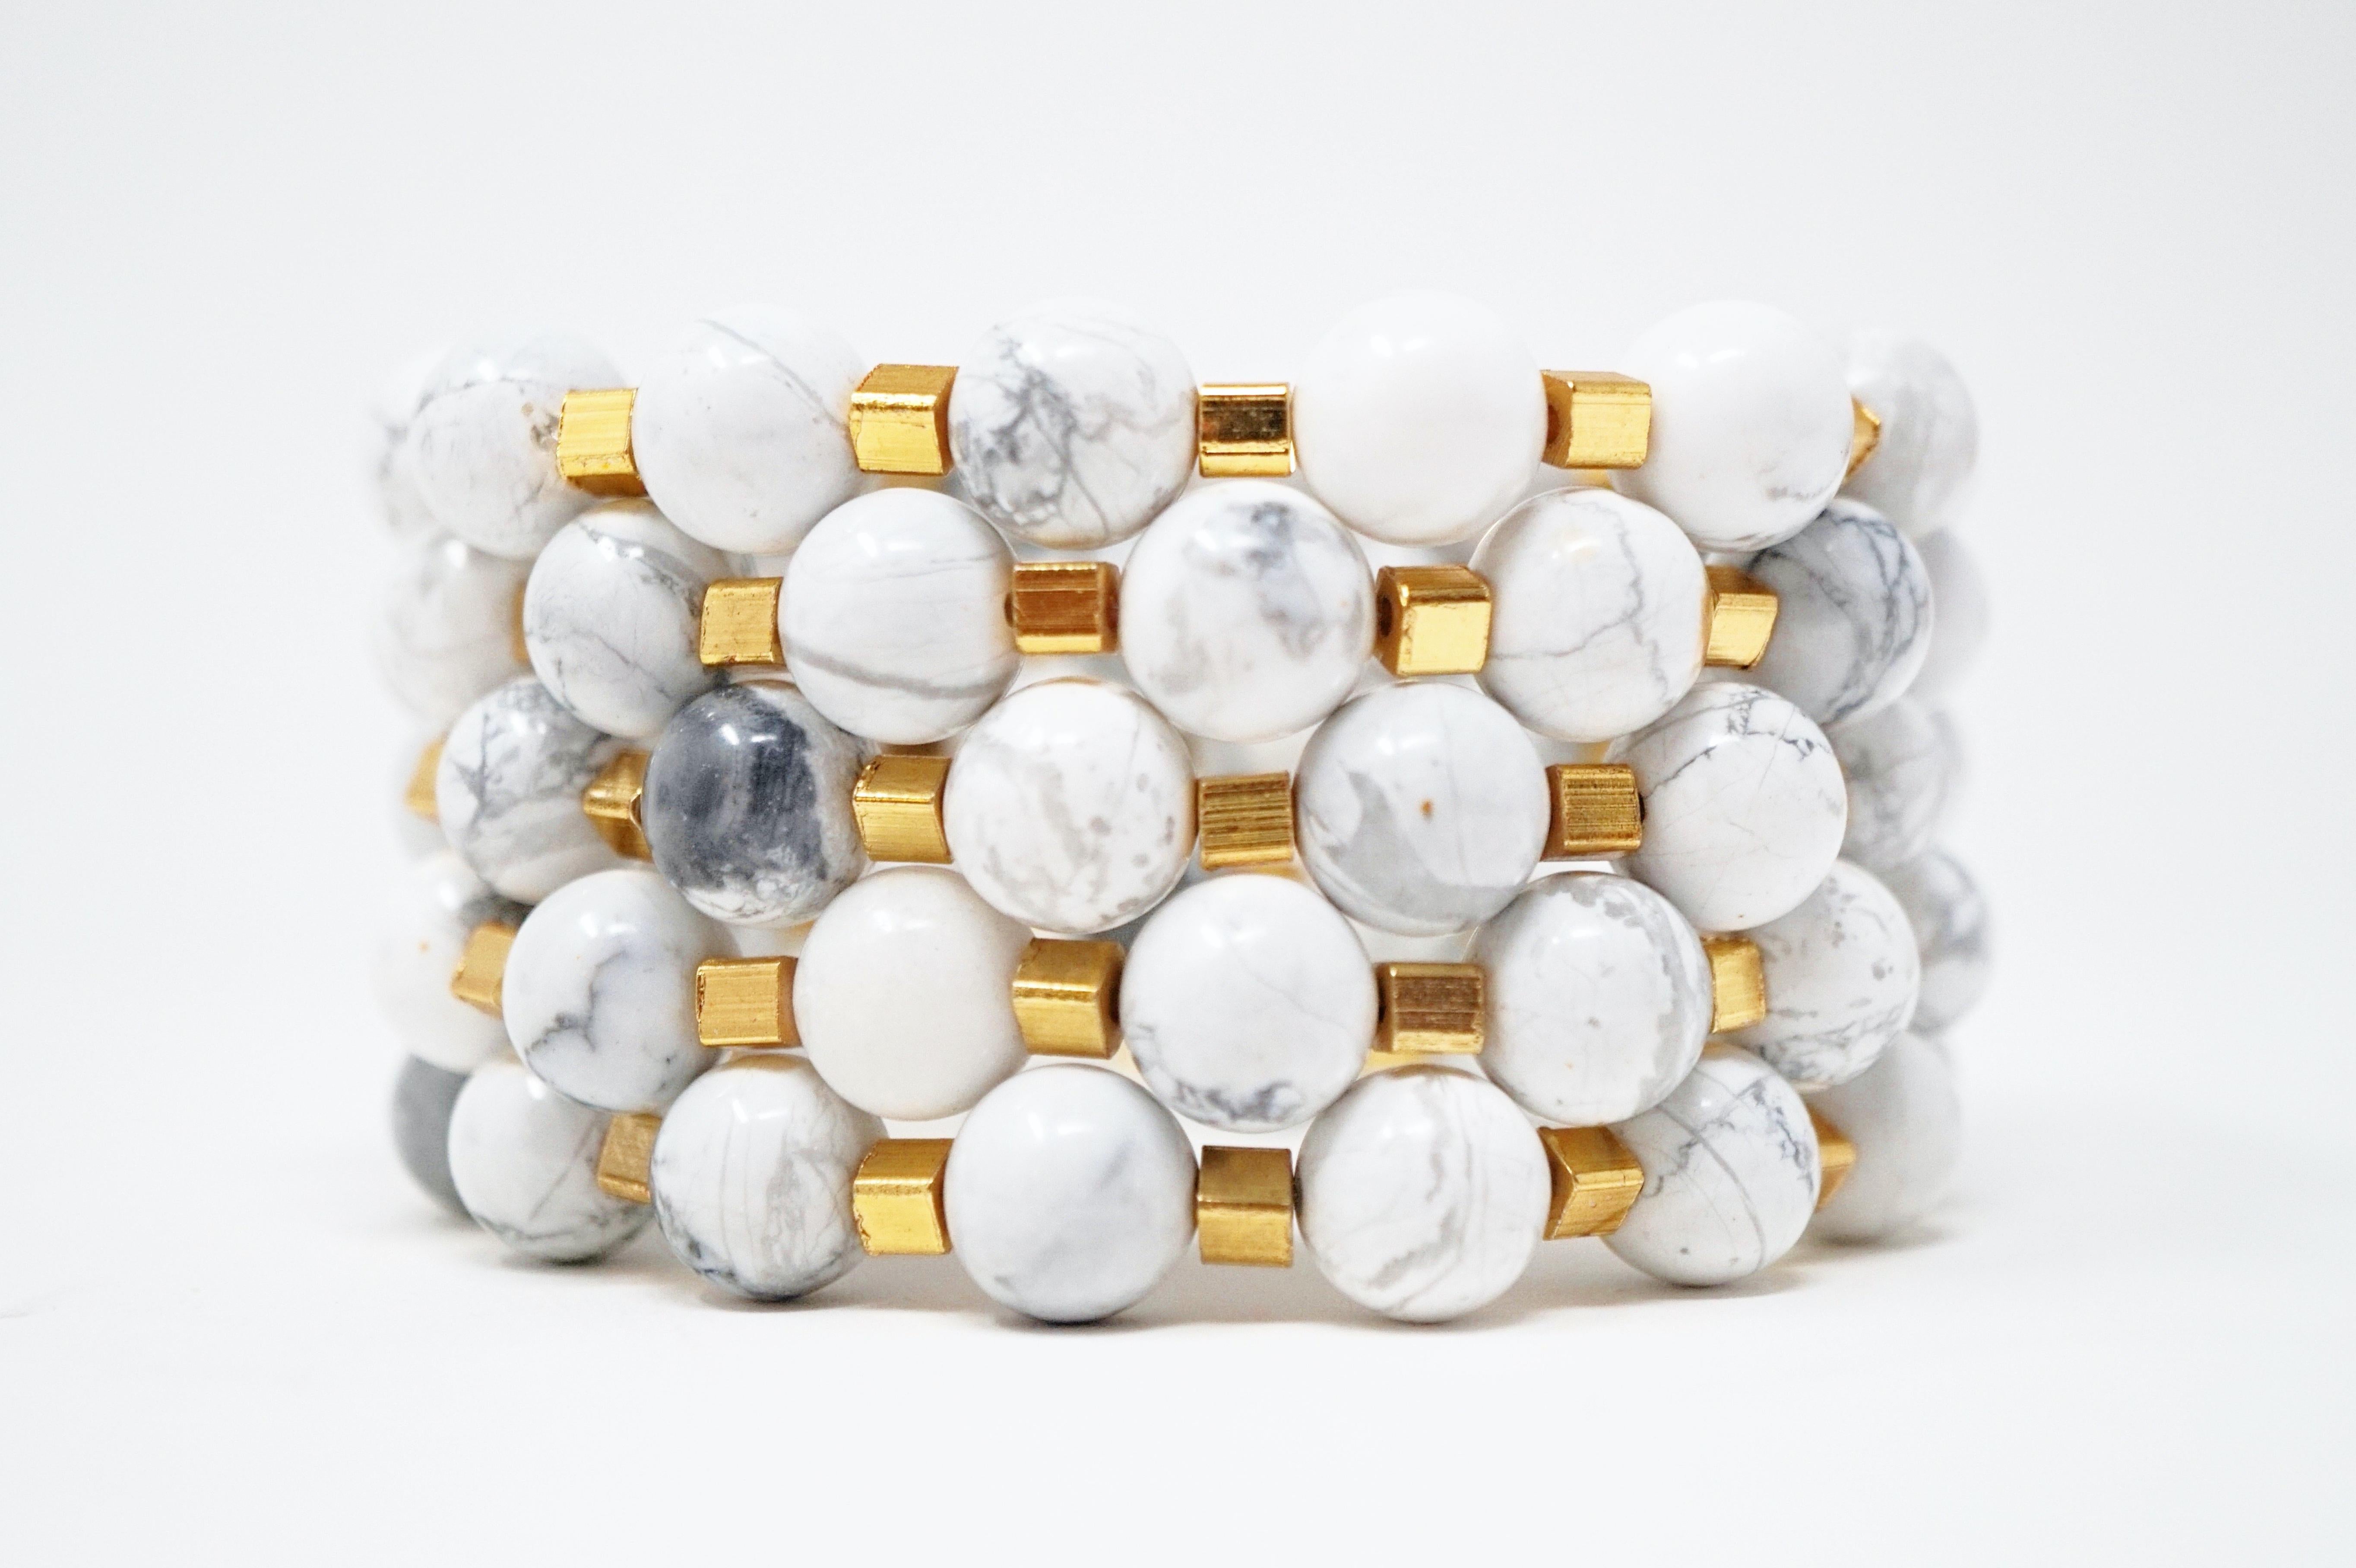 This gorgeous natural Howlite gemstone bracelet stack with gold plated accents is made up of five individual bracelets that can be worn individually or stacked together for a bolder look. When stacked, the bracelets nestle within each other.